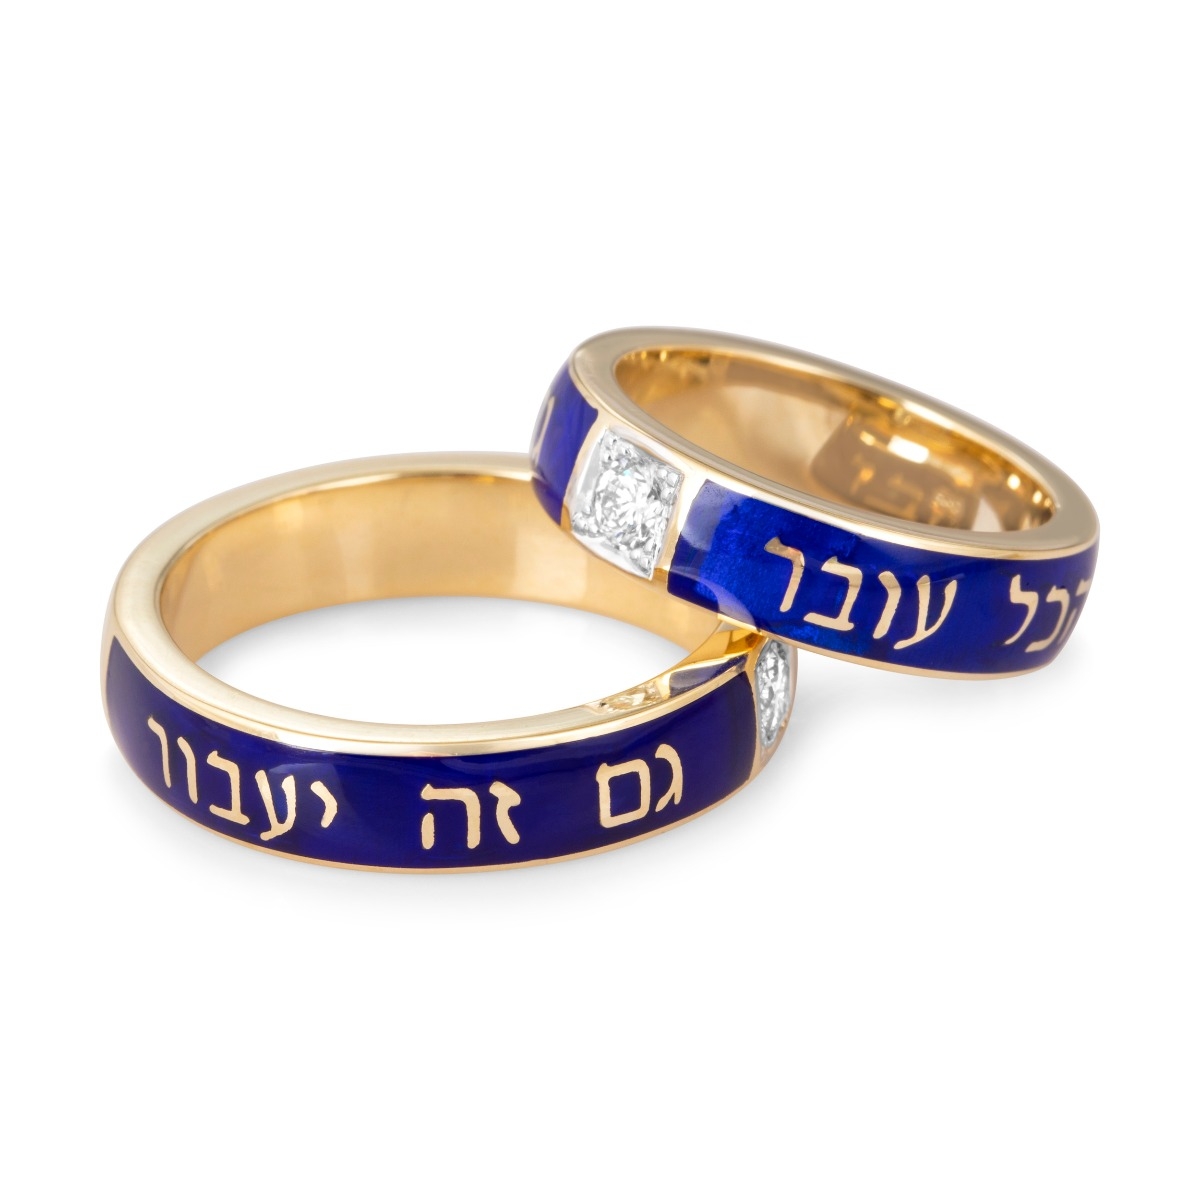 Deluxe Diamond-Accented 14K Yellow Gold and Blue Enamel "This Too Shall Pass" Ring (Hebrew) – For Women and Men - 1